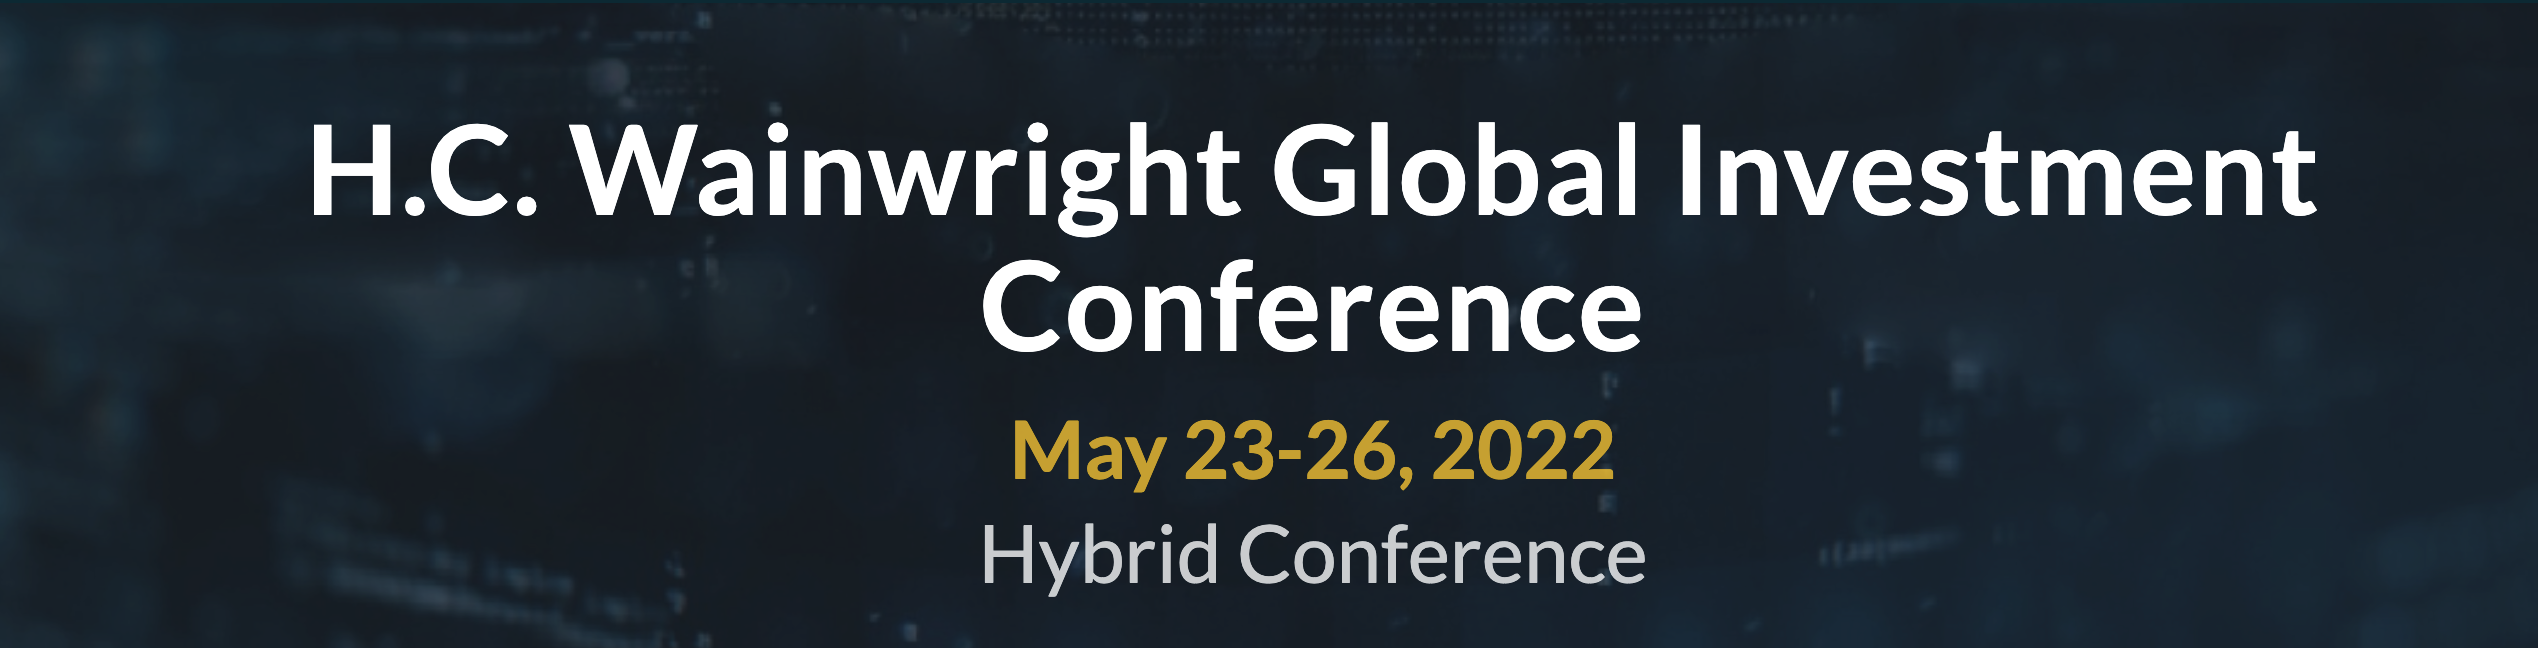 The Glimpse Group to Participate in the H.C. Wainwright Global Investment Conference May 23-26, 2022